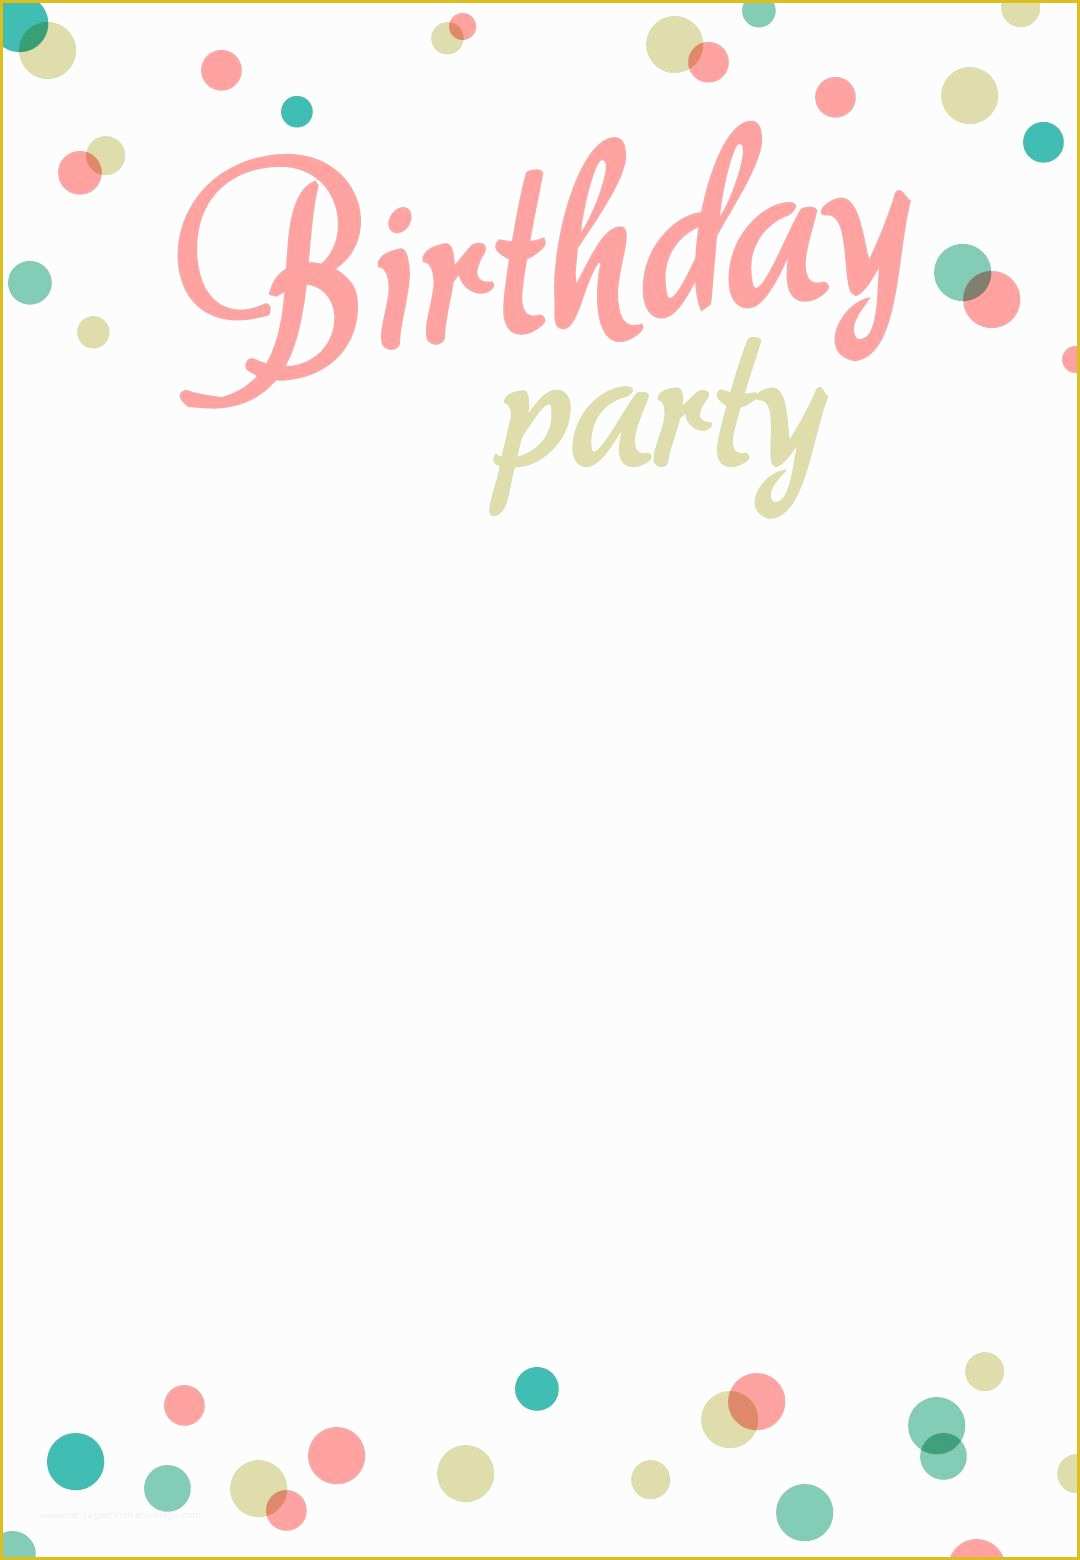 Free Birthday Card Templates for Word Of Birthday Party Invitation Free Printable